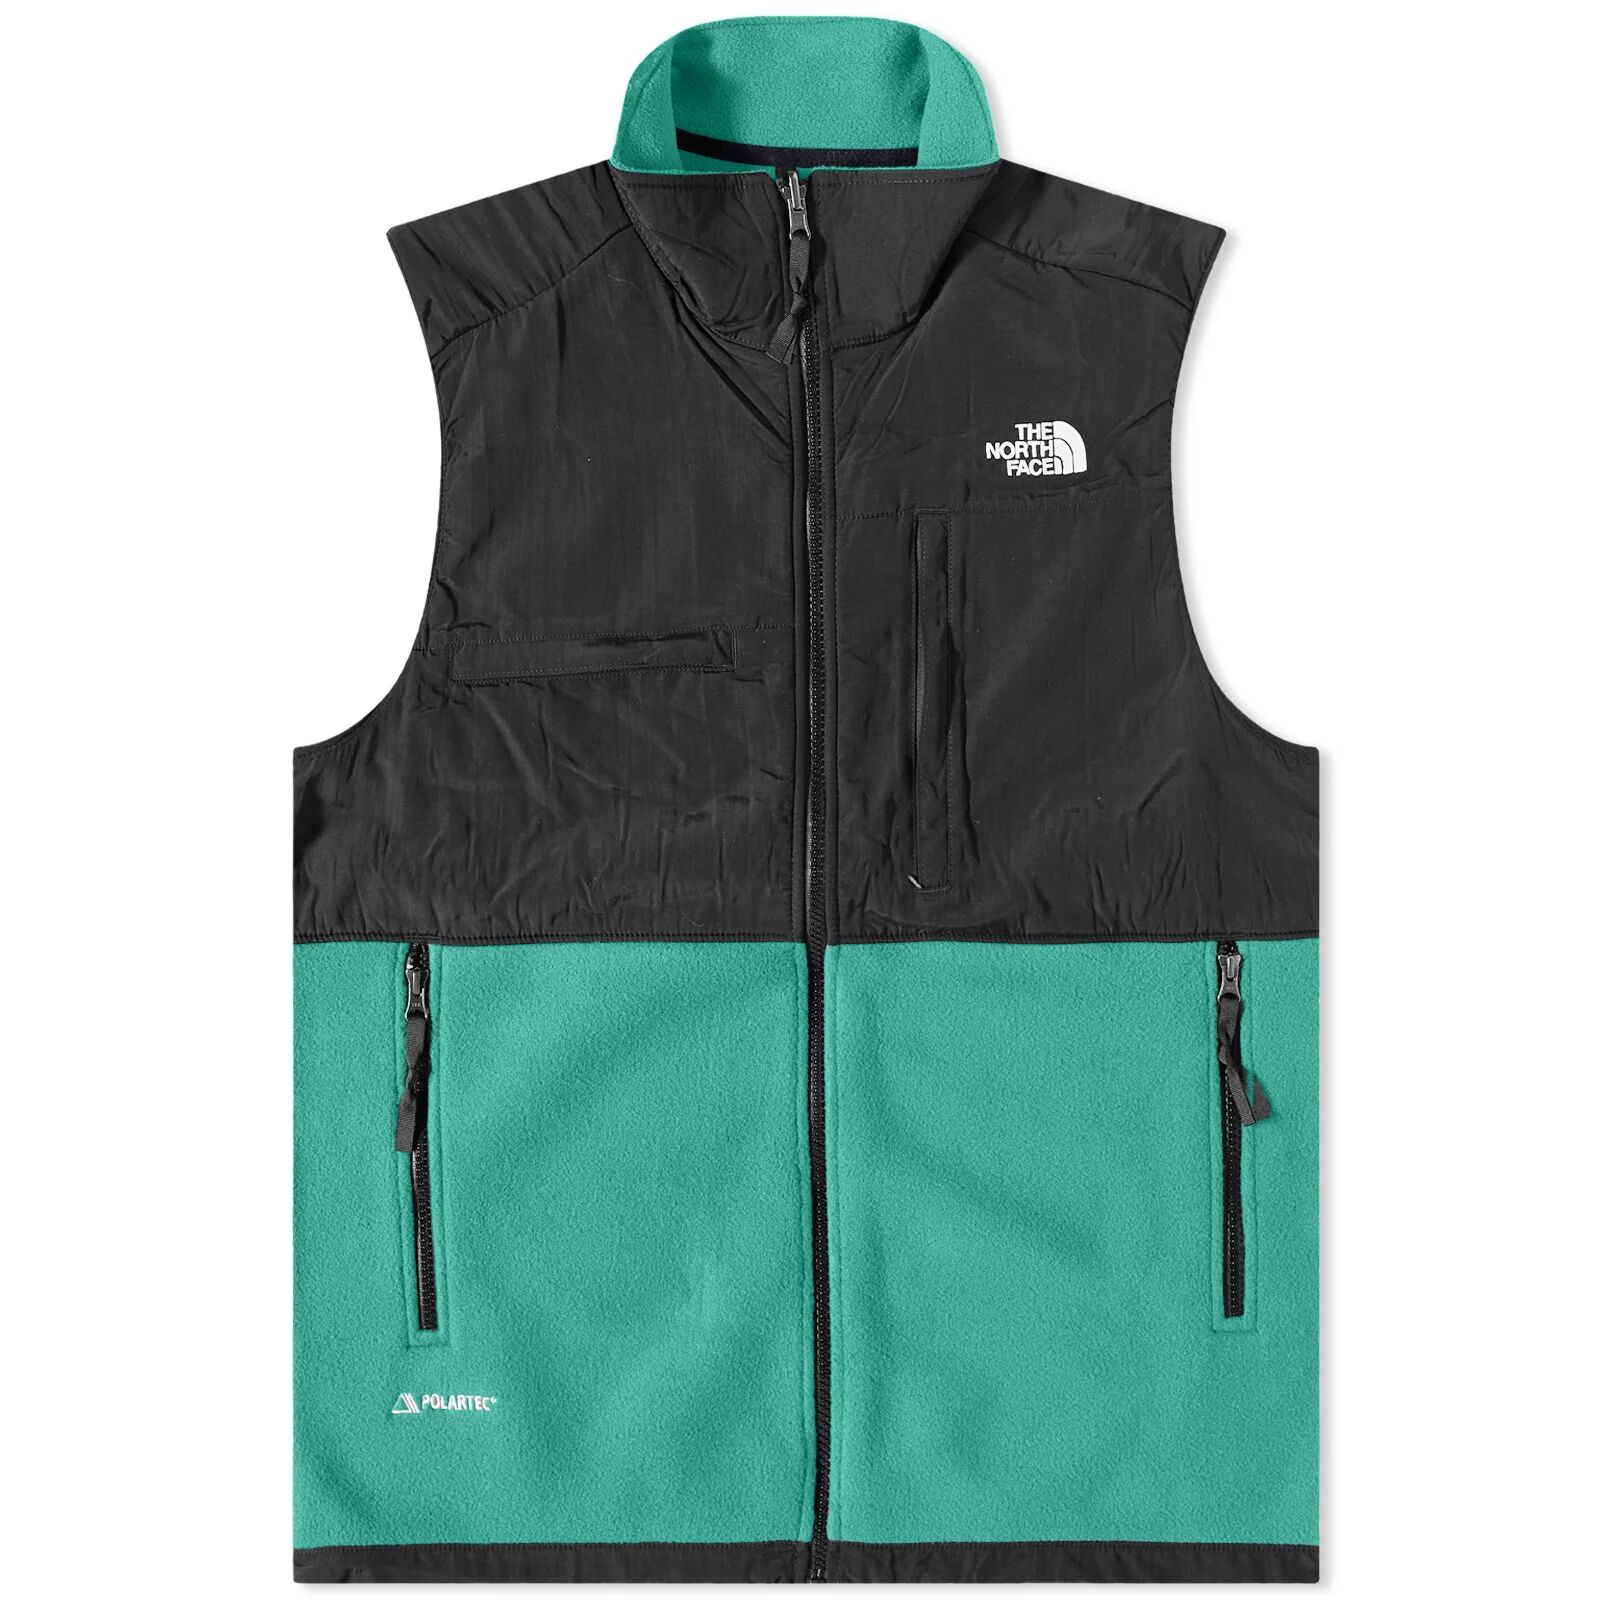 The North Face Men's Denali Vest in Deep Grass Green, Size Small